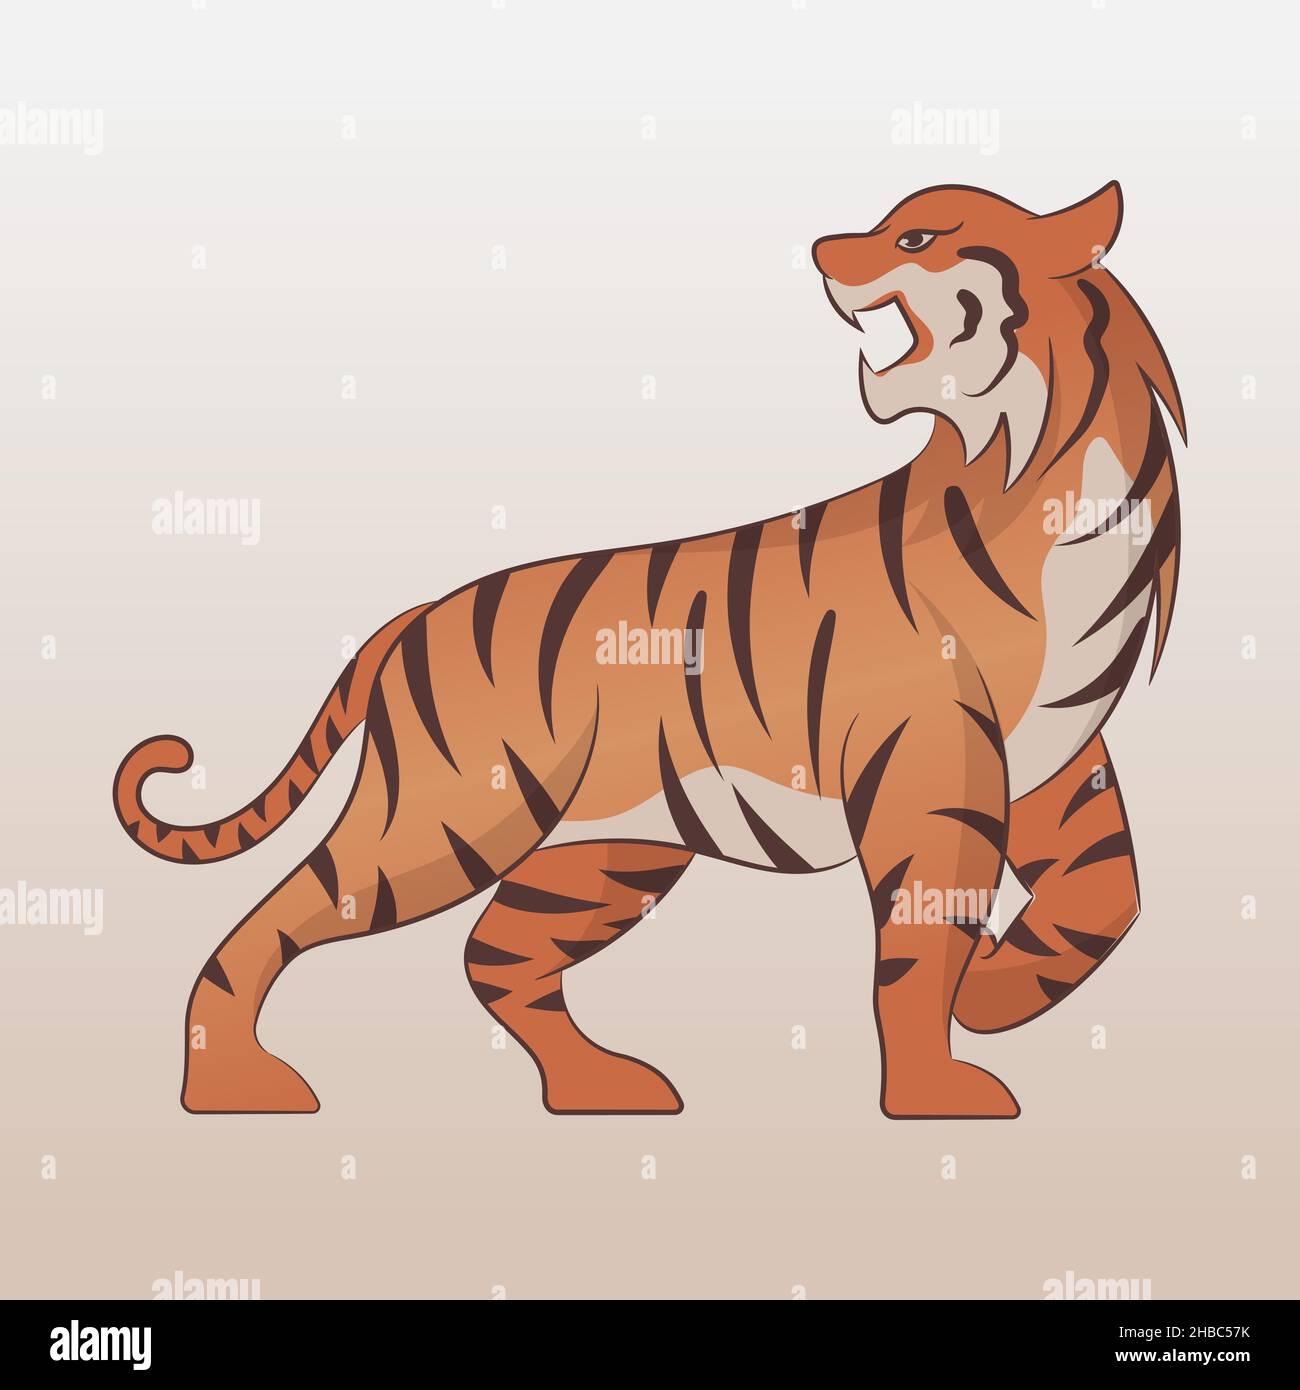 Simple Tiger vector illustration with classic color design Stock Vector